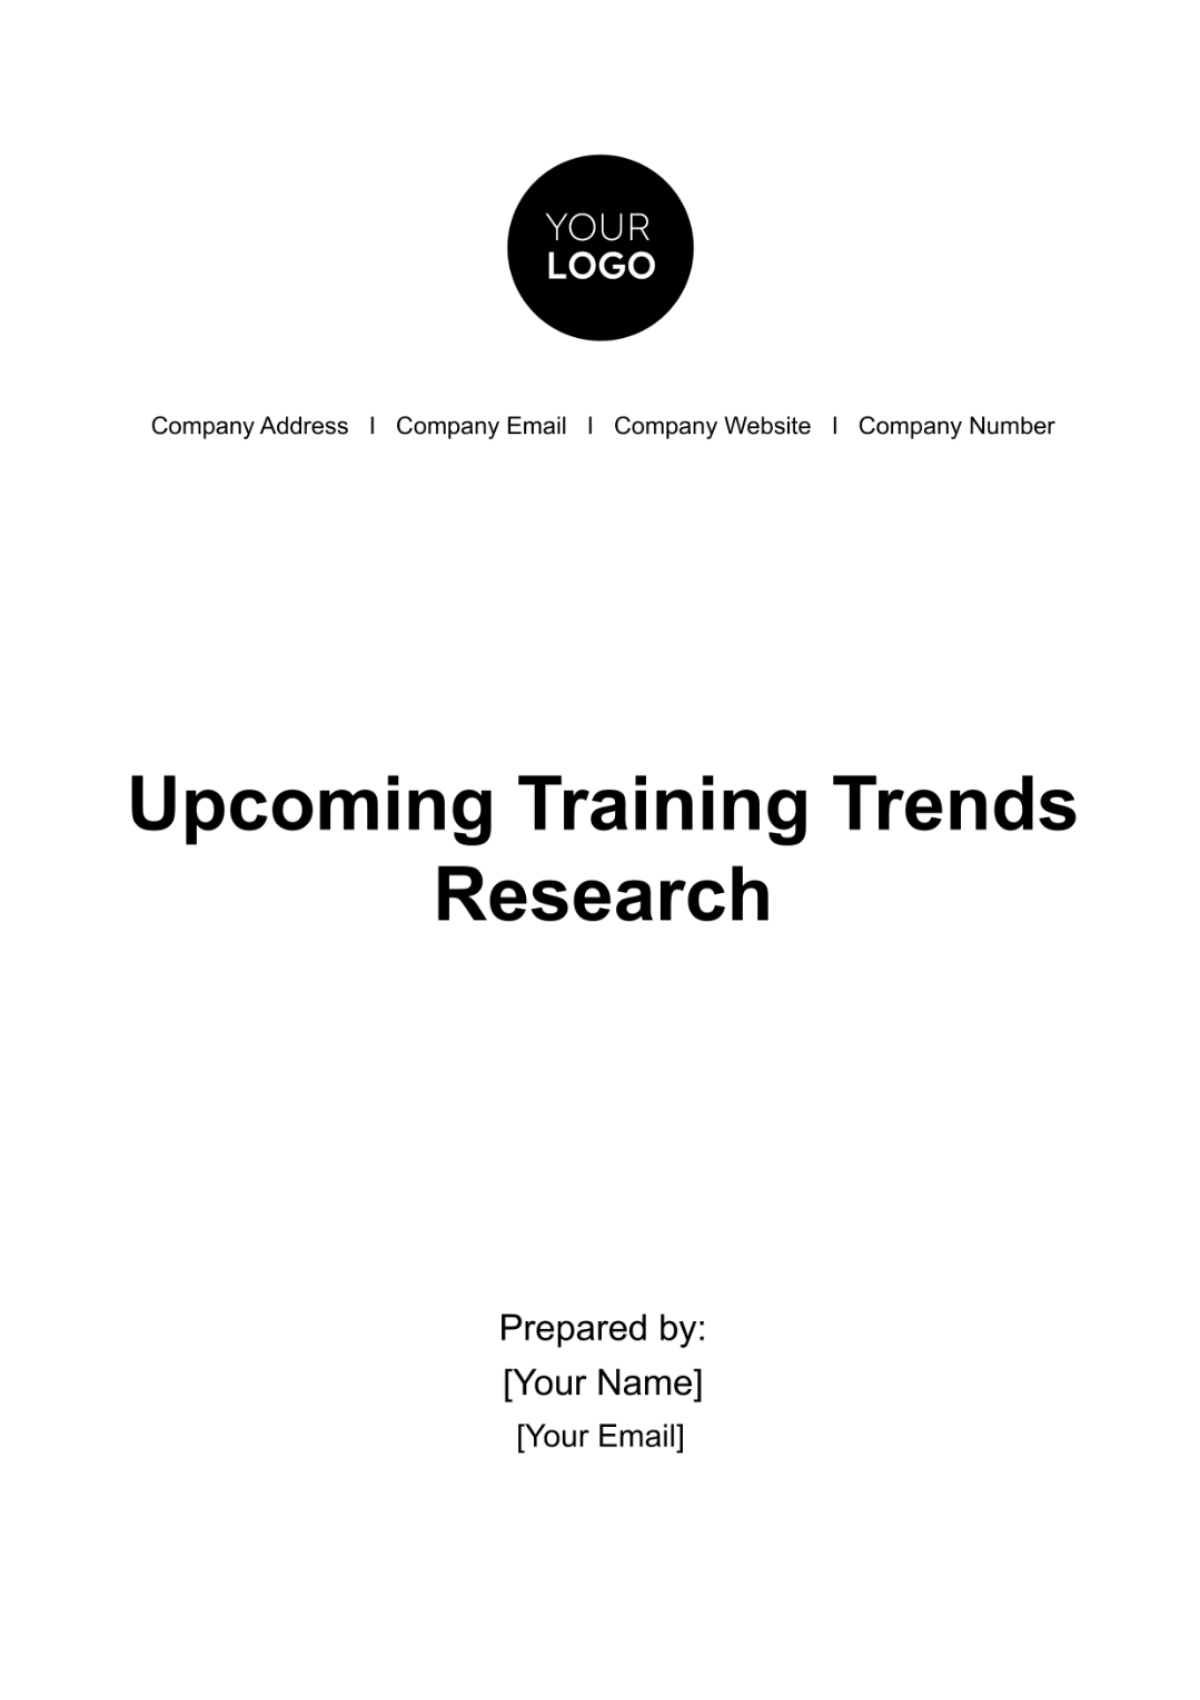 Upcoming Training Trends Research HR Template